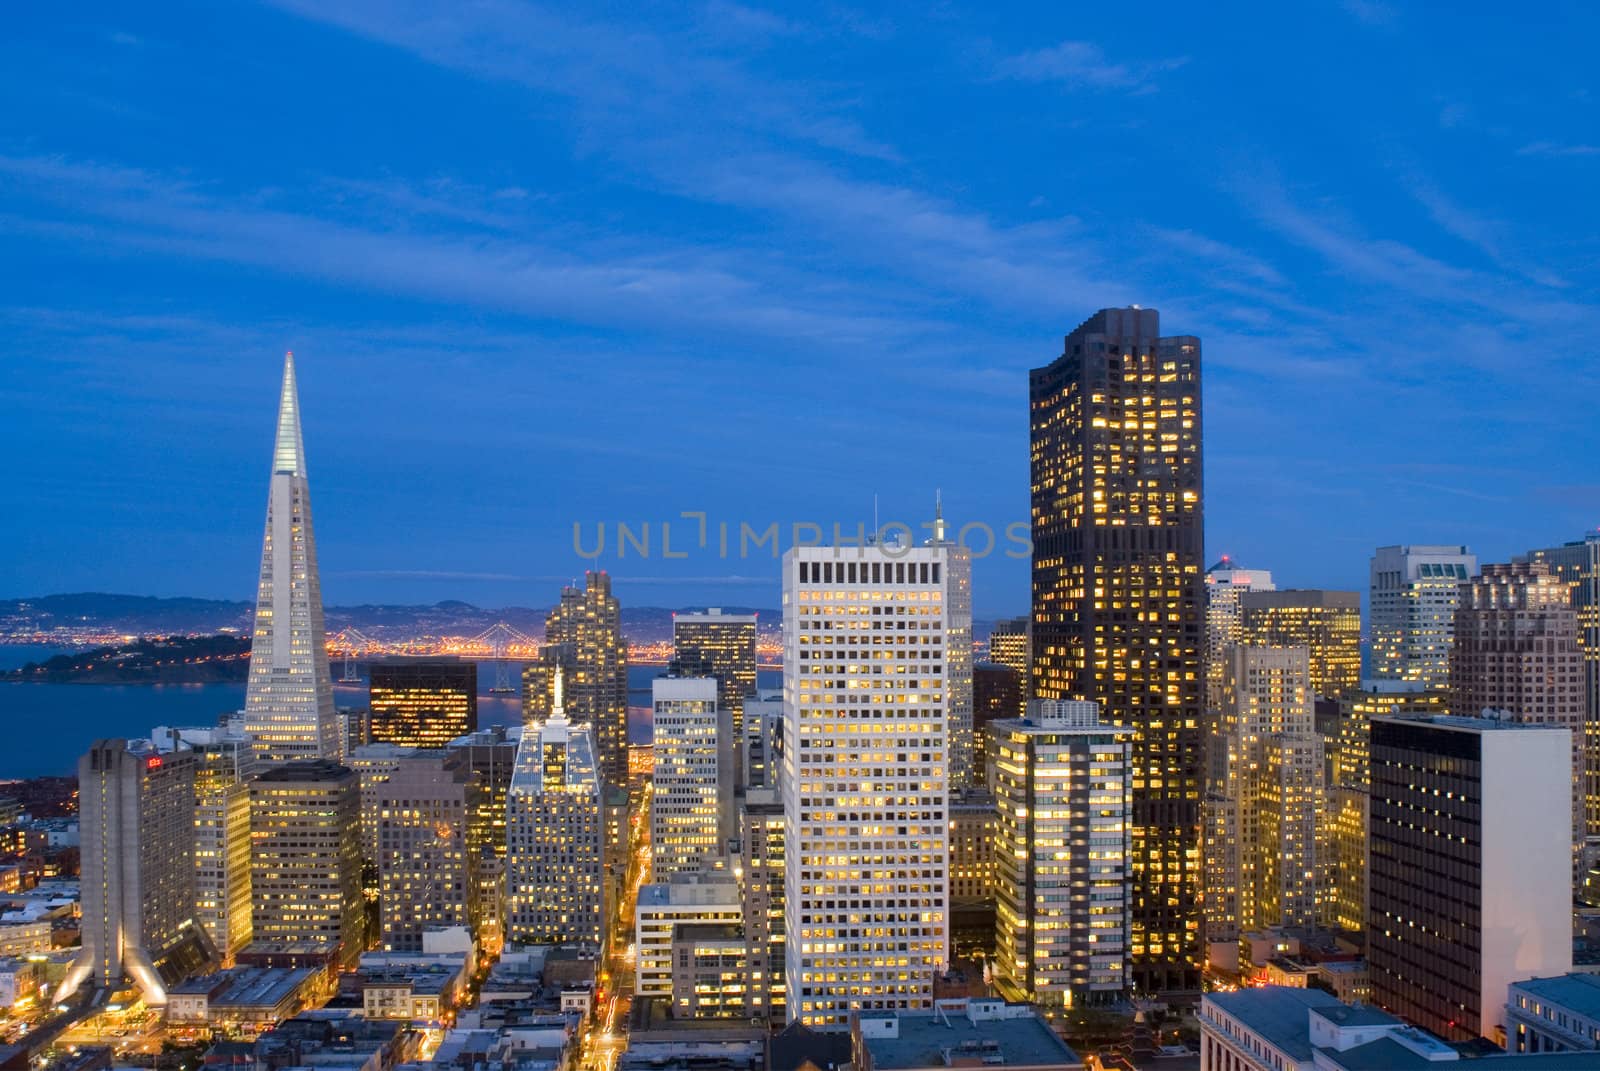 Spectacular evening view over the office buildings of downtown San Francisco